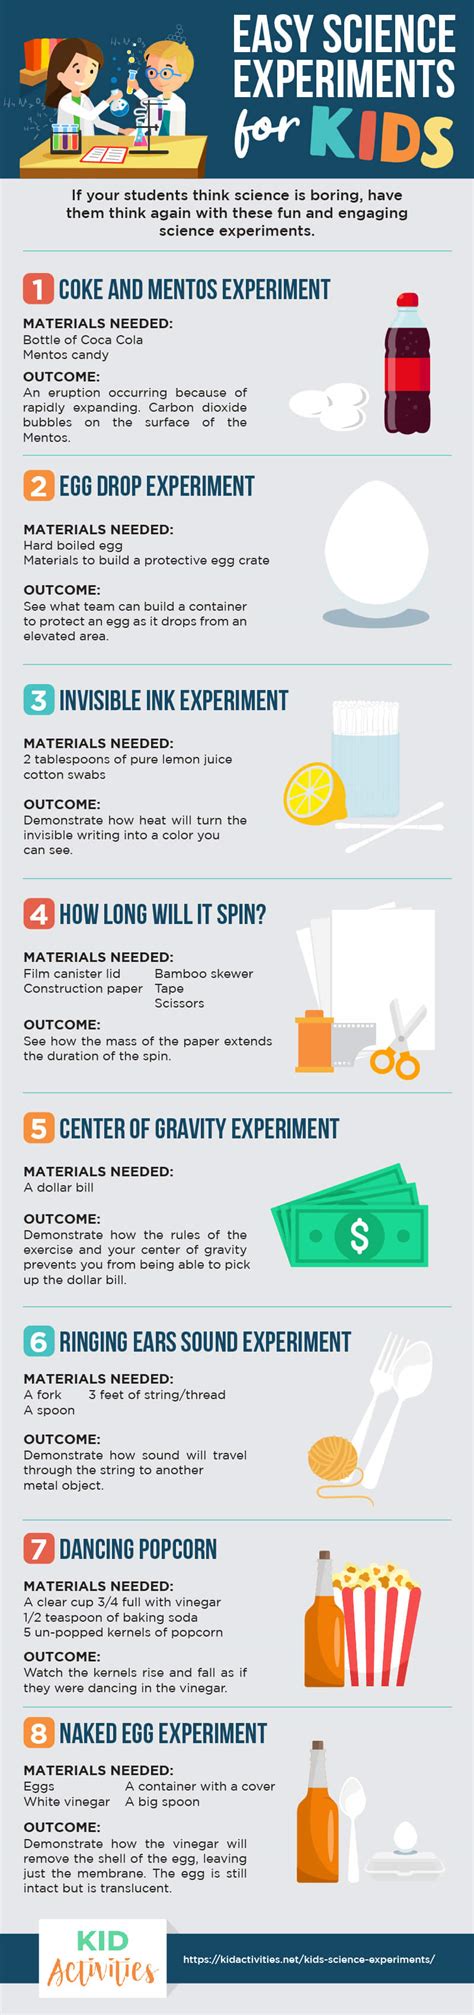 16 Easy Kids Science Experiments For Home And School Fun Experiment Ideas